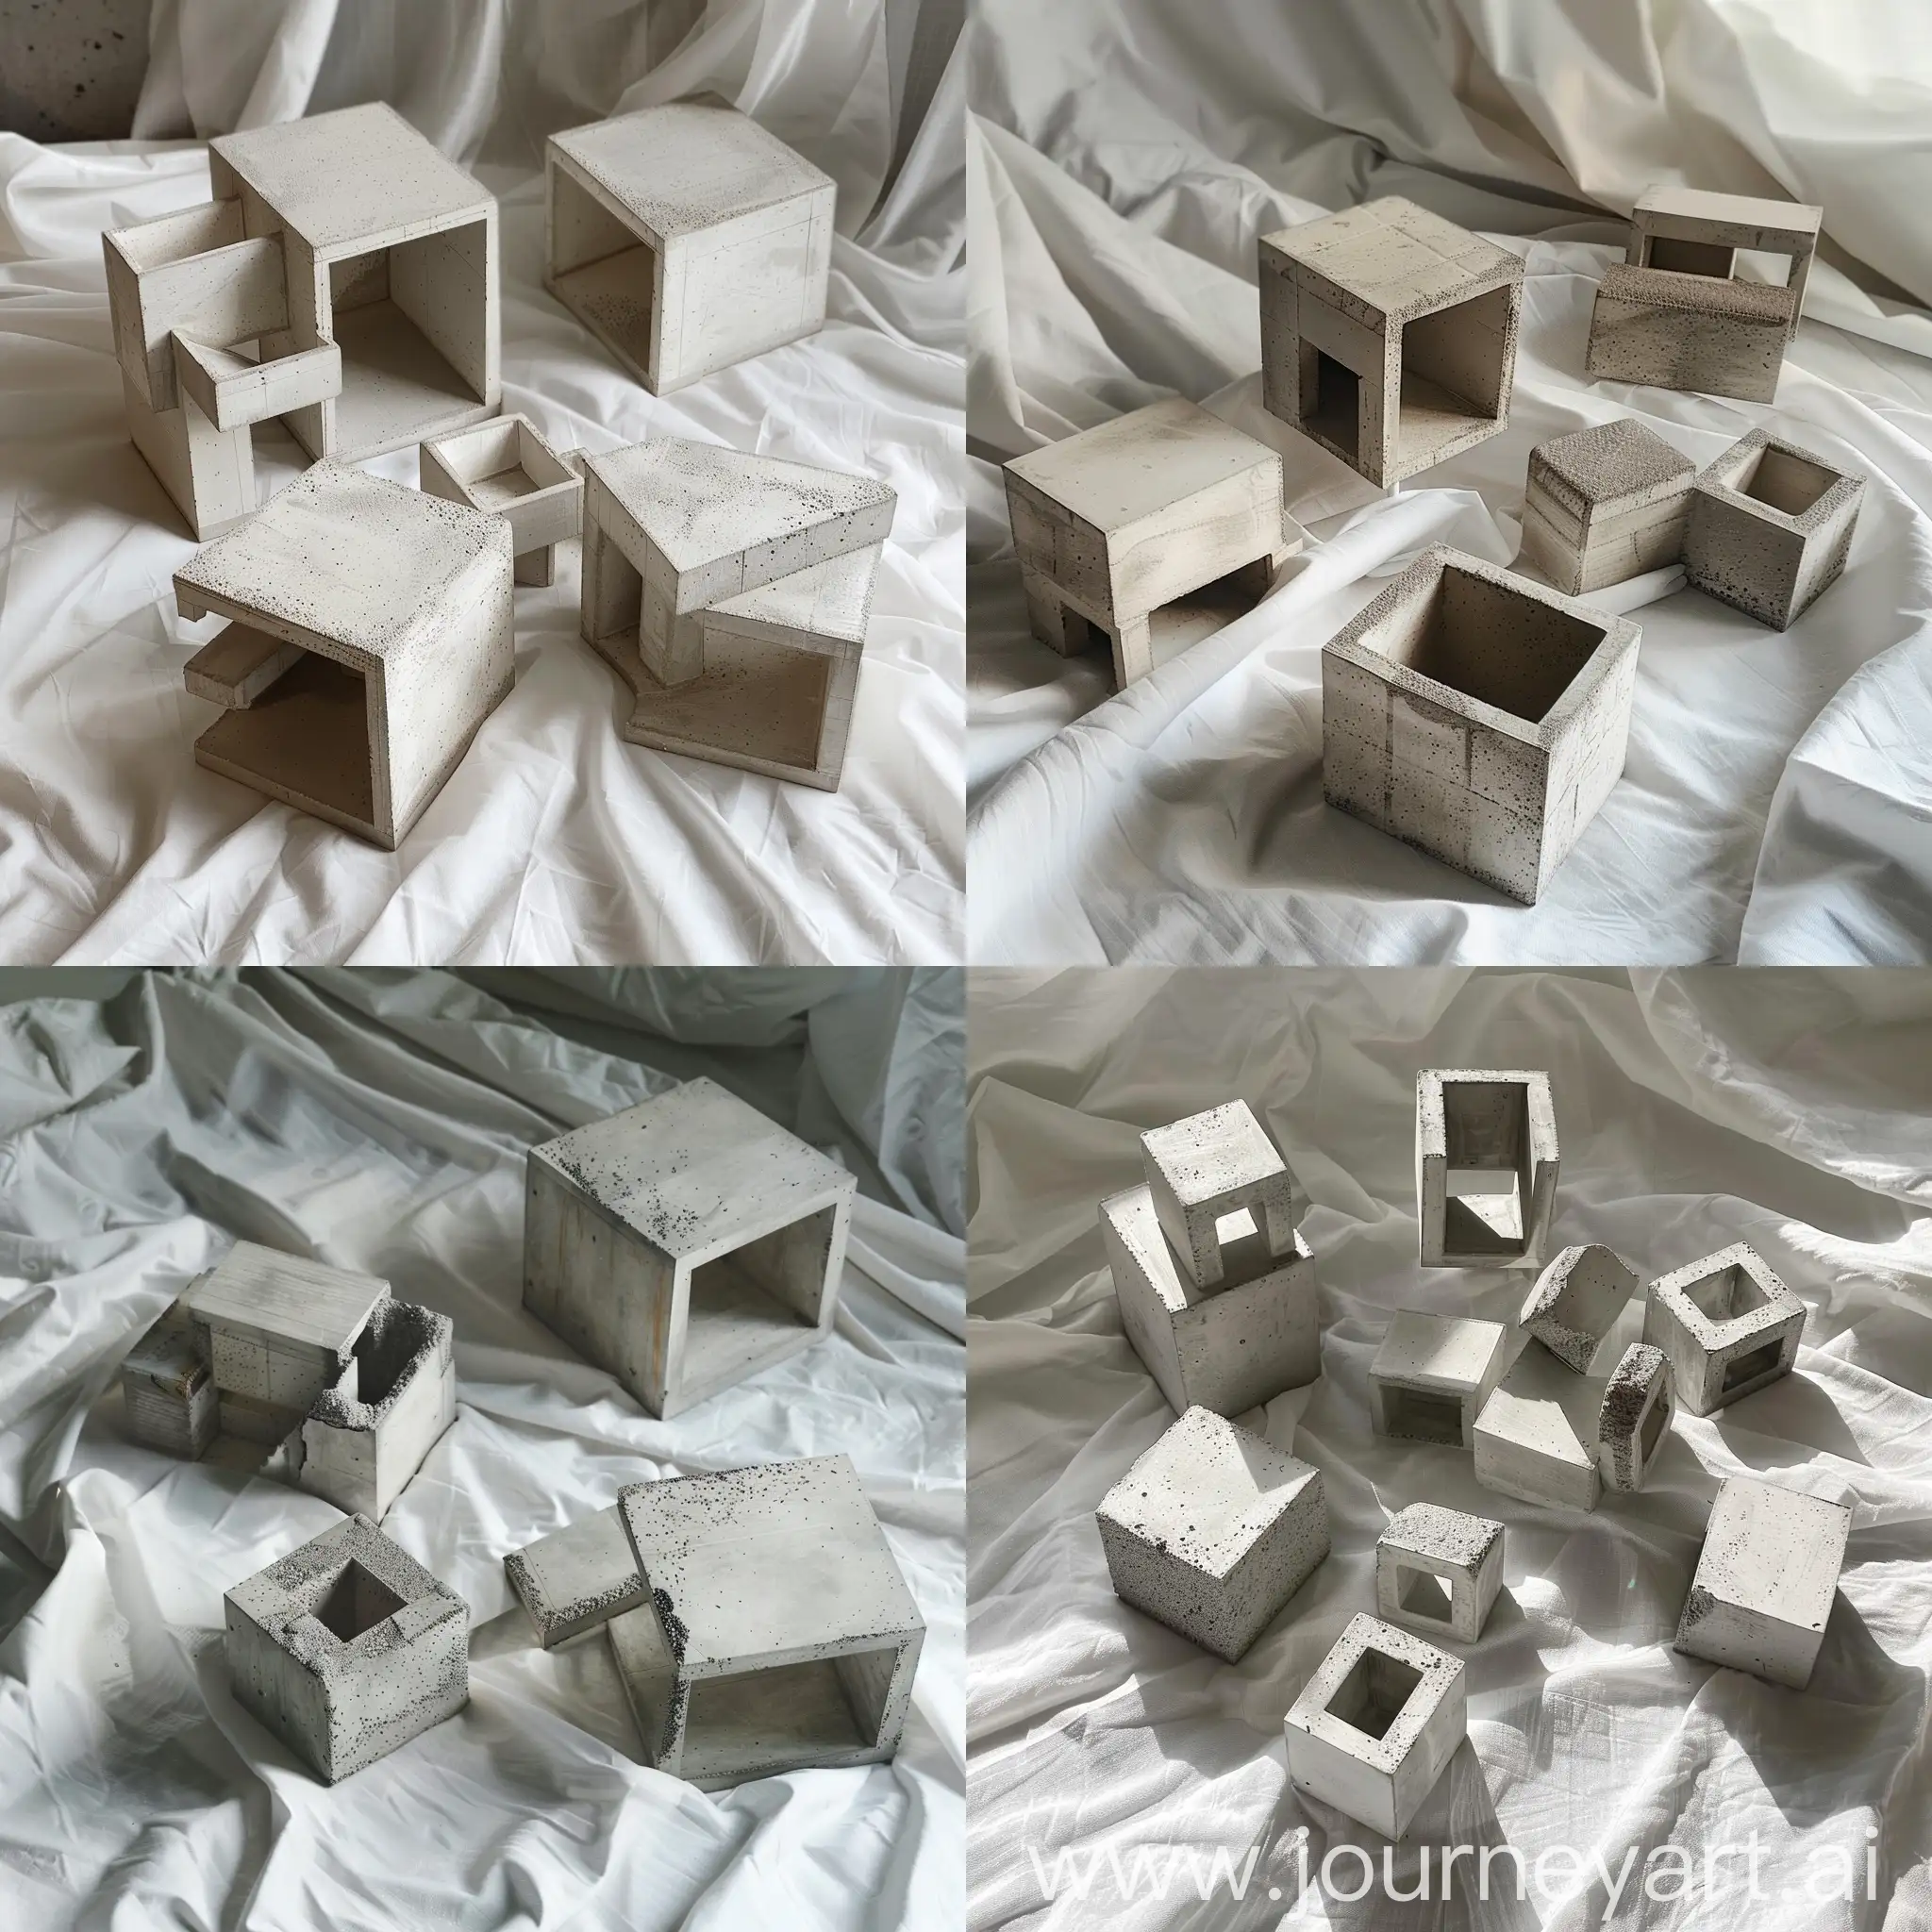 some concrete architecture cubic models near each other on a white sheet, from top view, super detailed